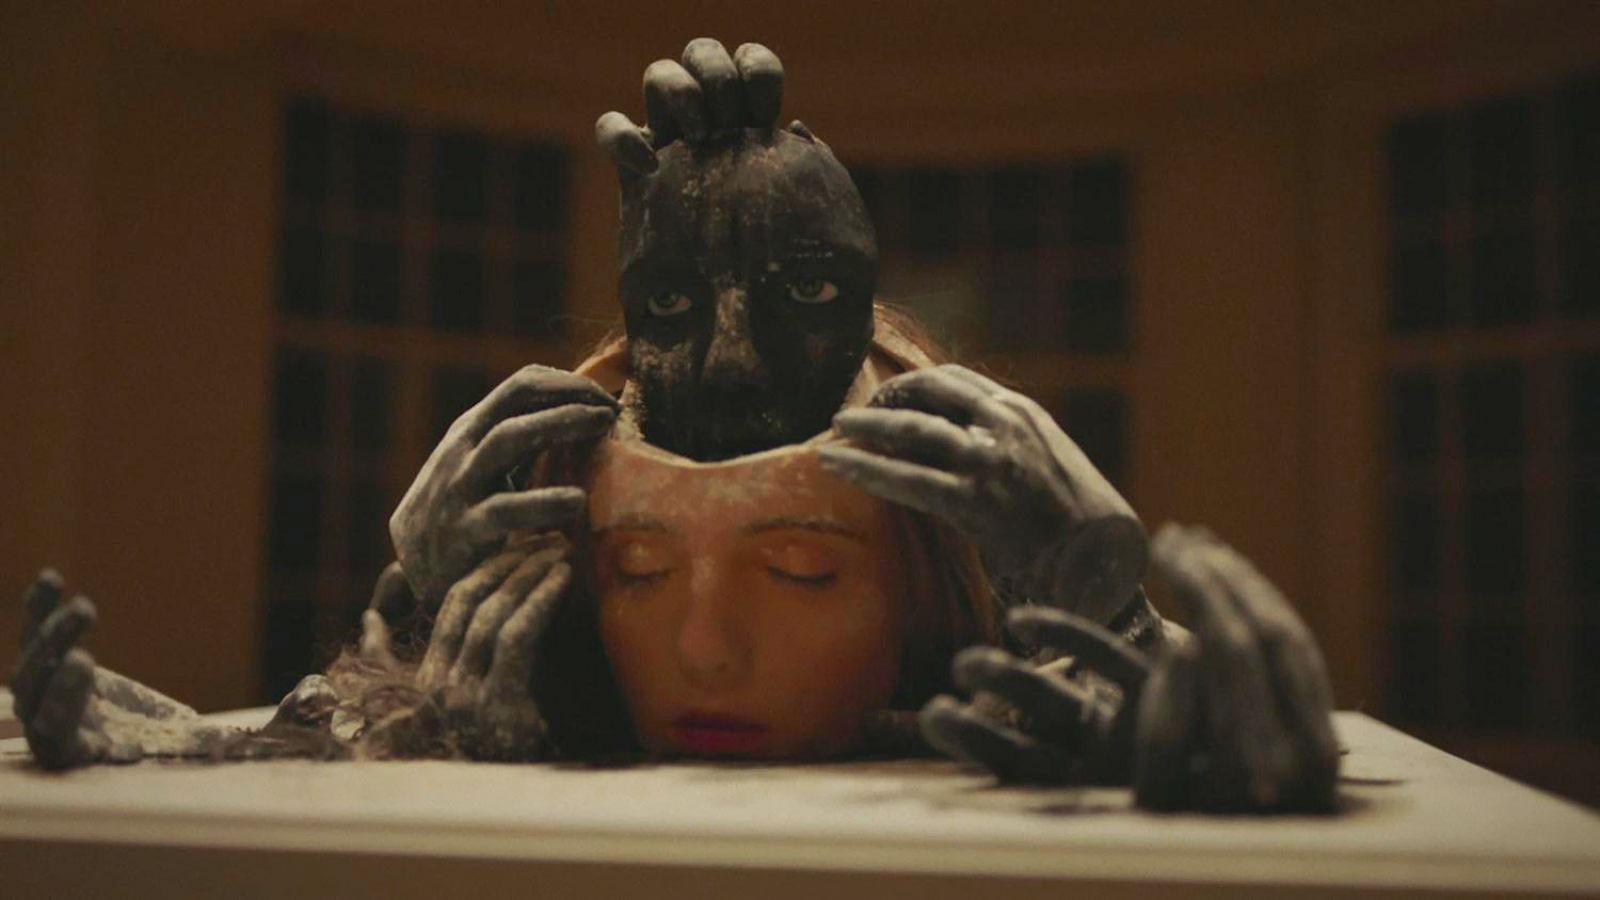 How ‘Channel Zero’ turns online ‘creepypasta’ tales into TV horror | DeviceDaily.com